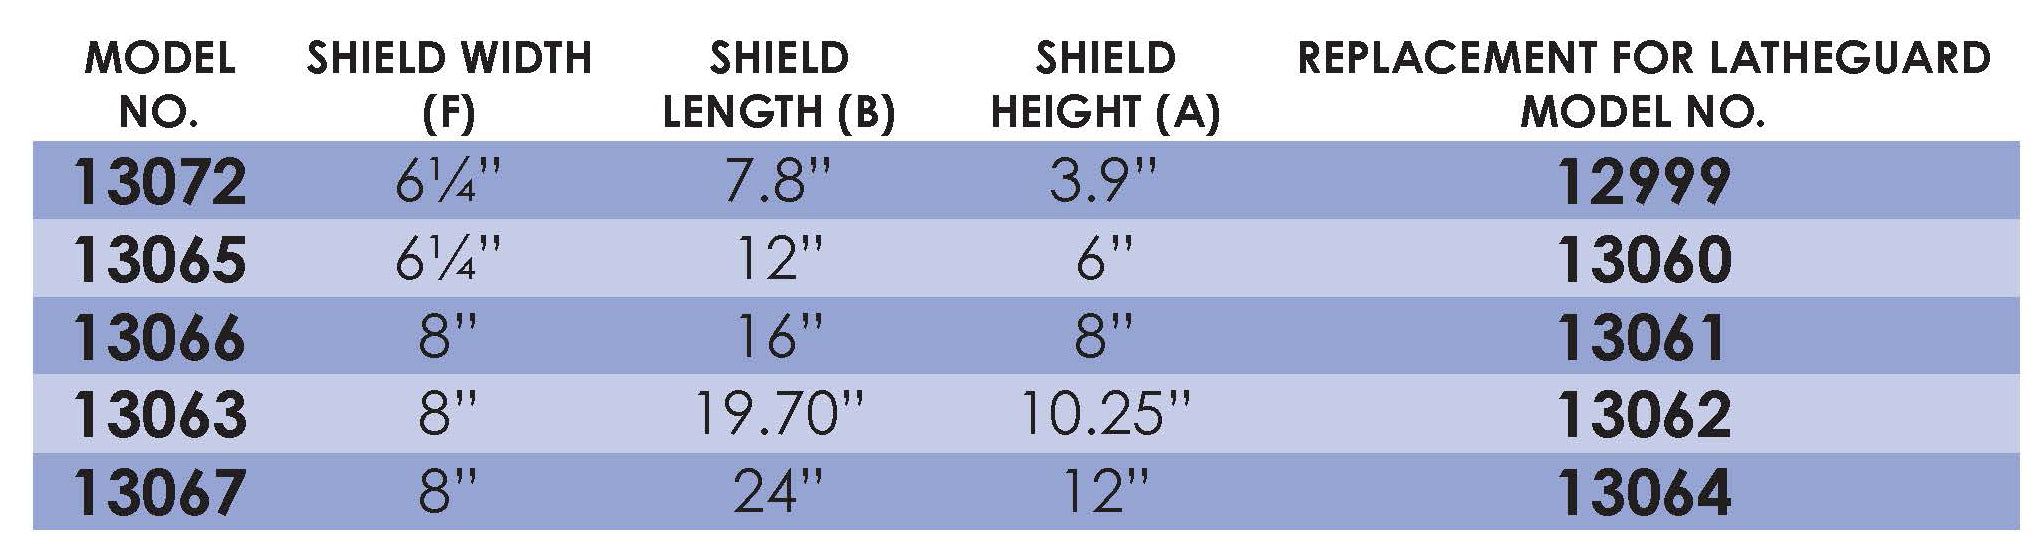 Replacement Shield - Large